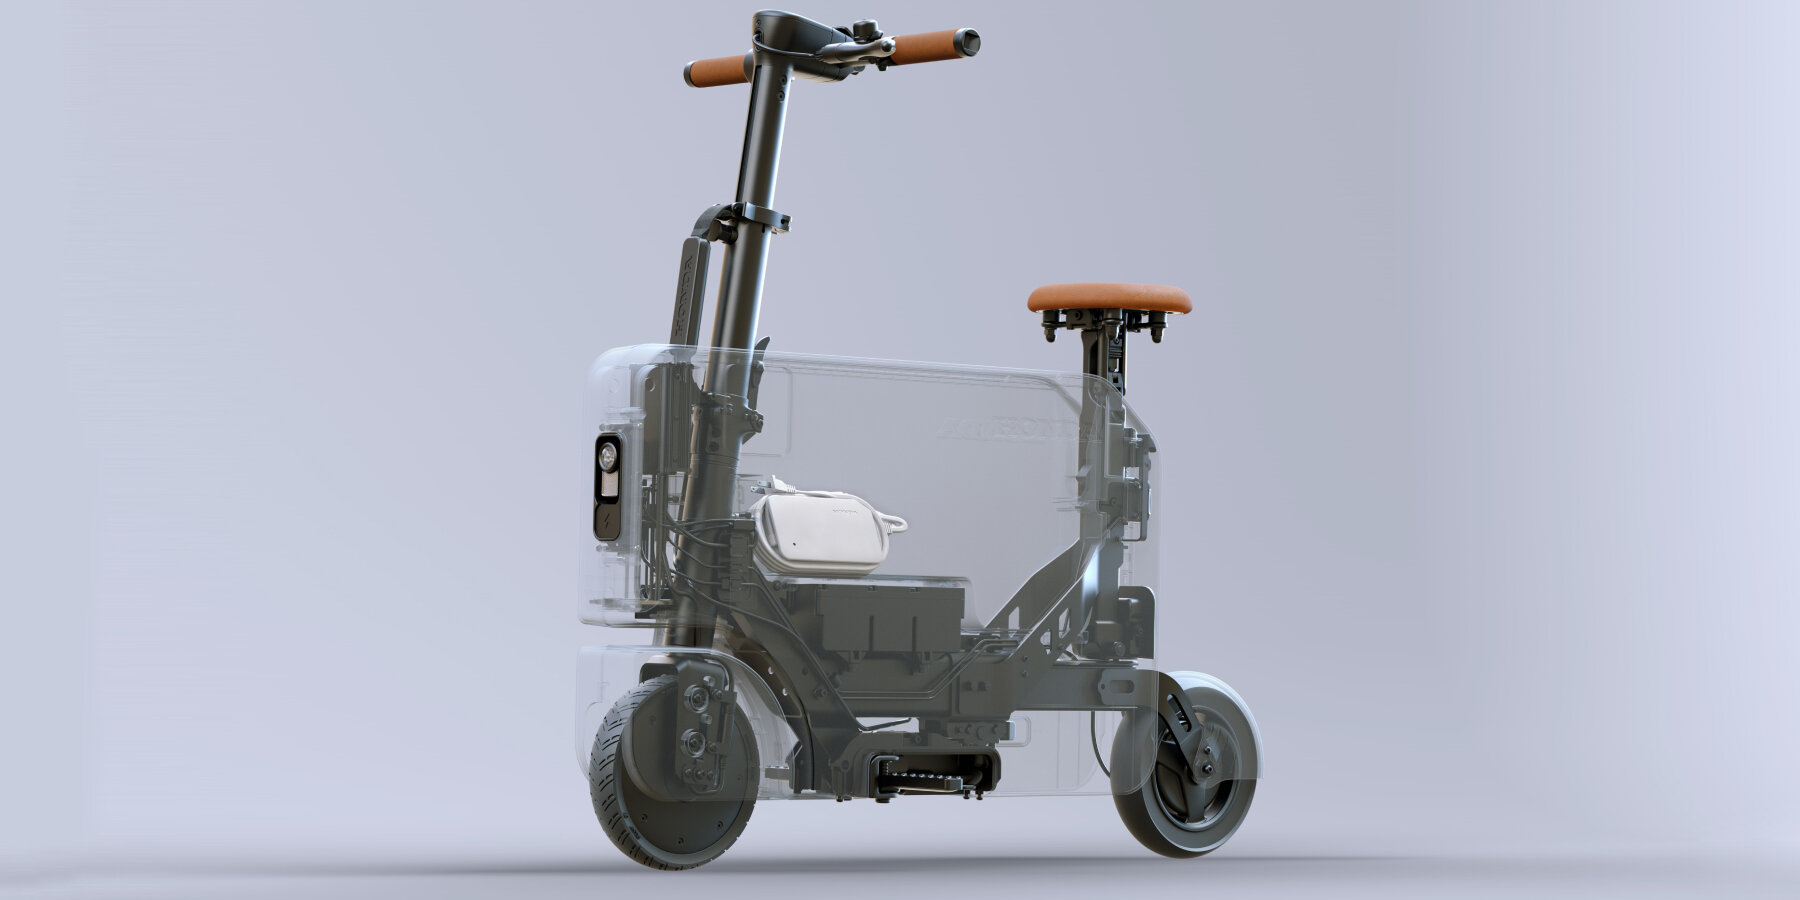 honda-motocompacto-electric-scooter-foldable